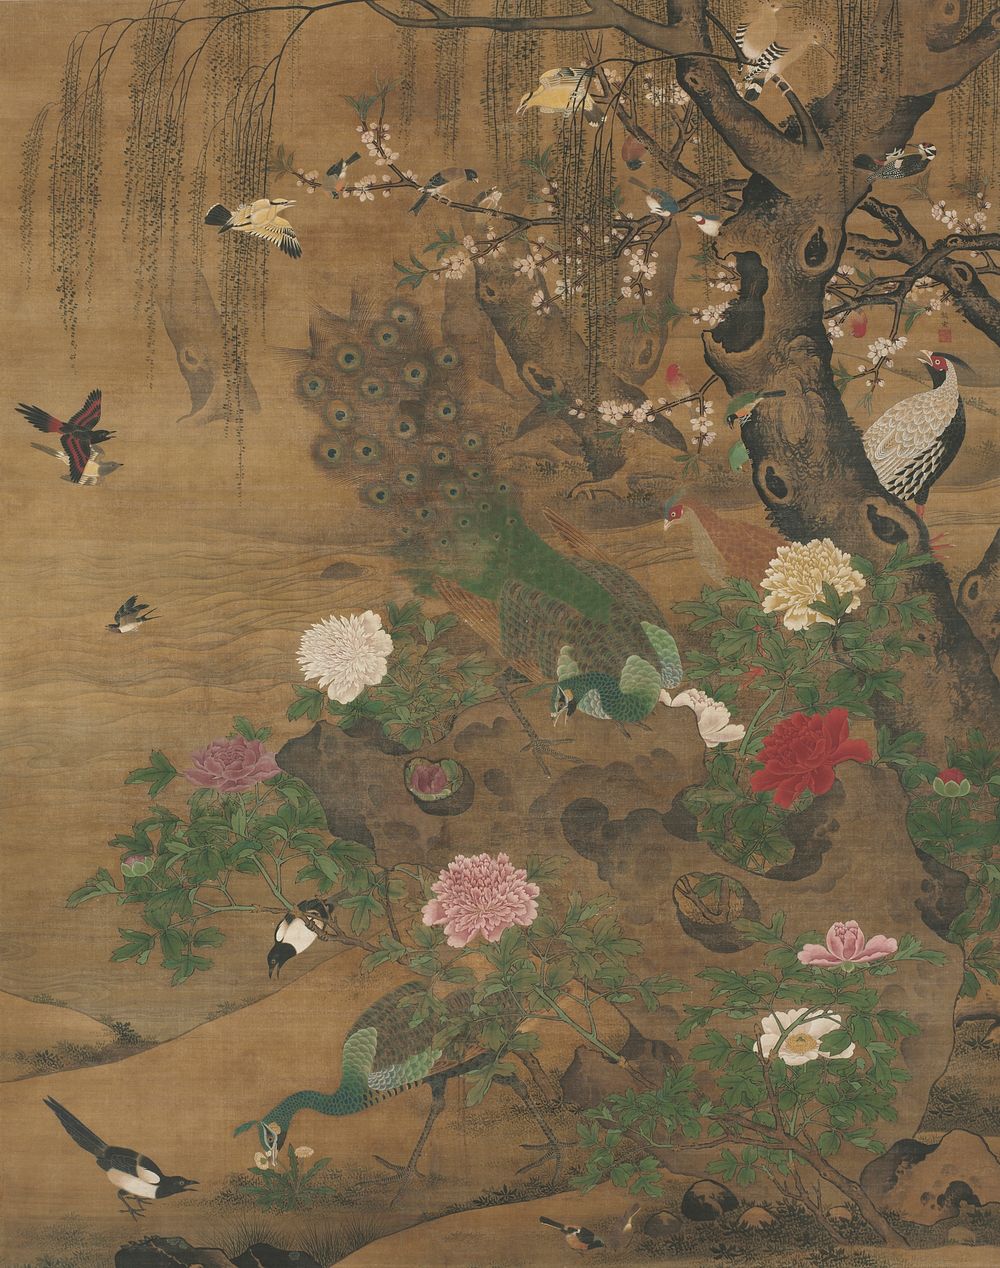 Birds Gather under the Spring Willow. Original from The Cleveland Museum of Art.